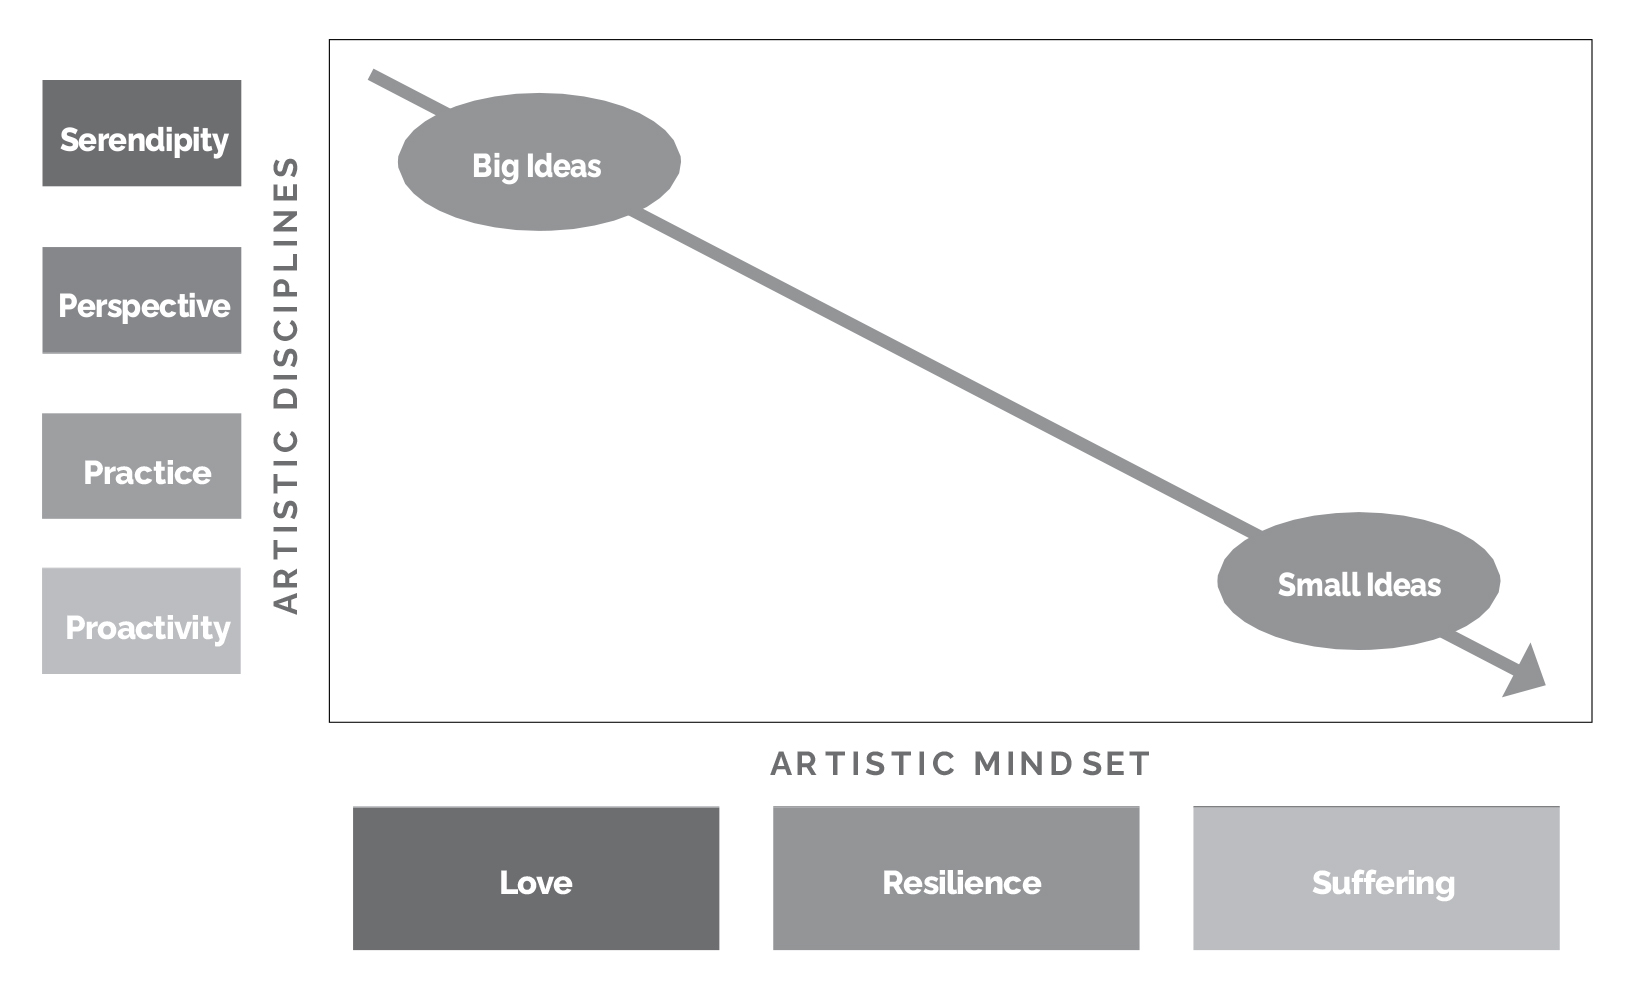 Graph depicting how Artistic mindset and discipline components may combine to yield
creative ideas